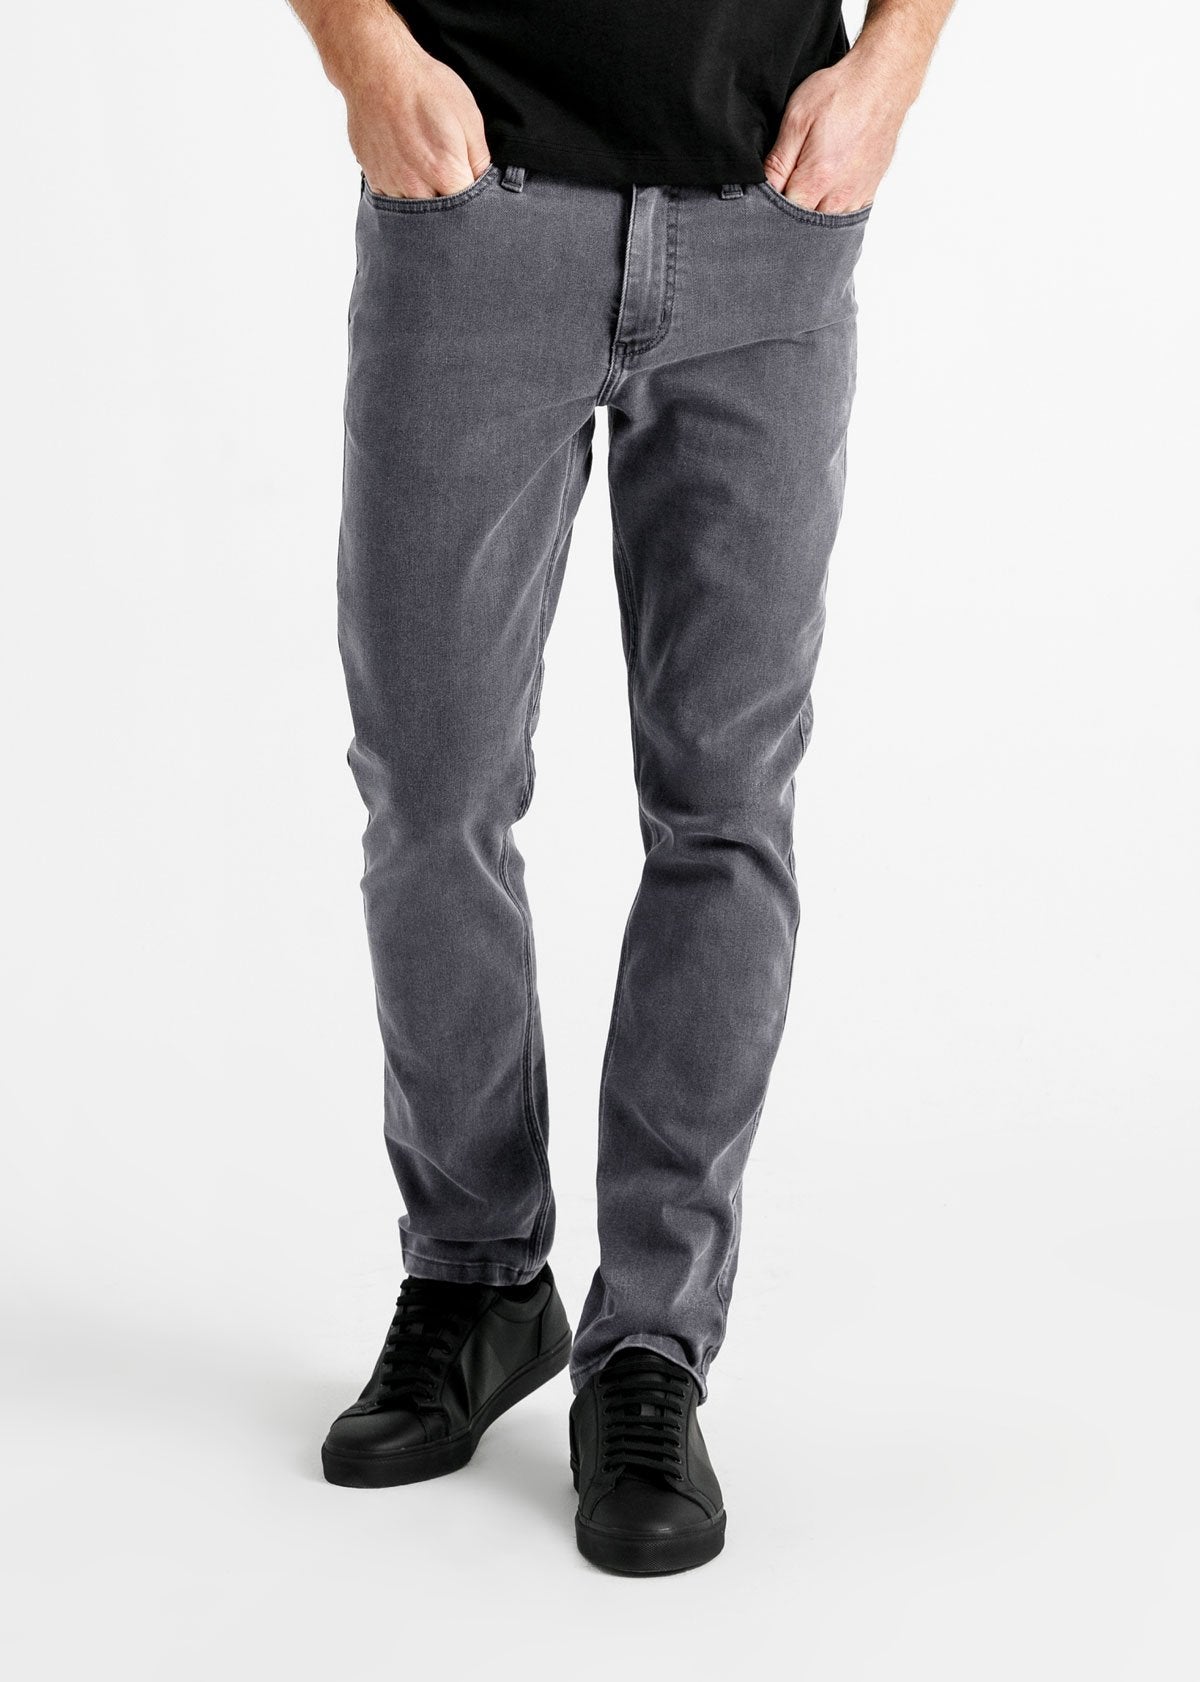 Men's high quality slim fit jeans with stretcher material-Grey